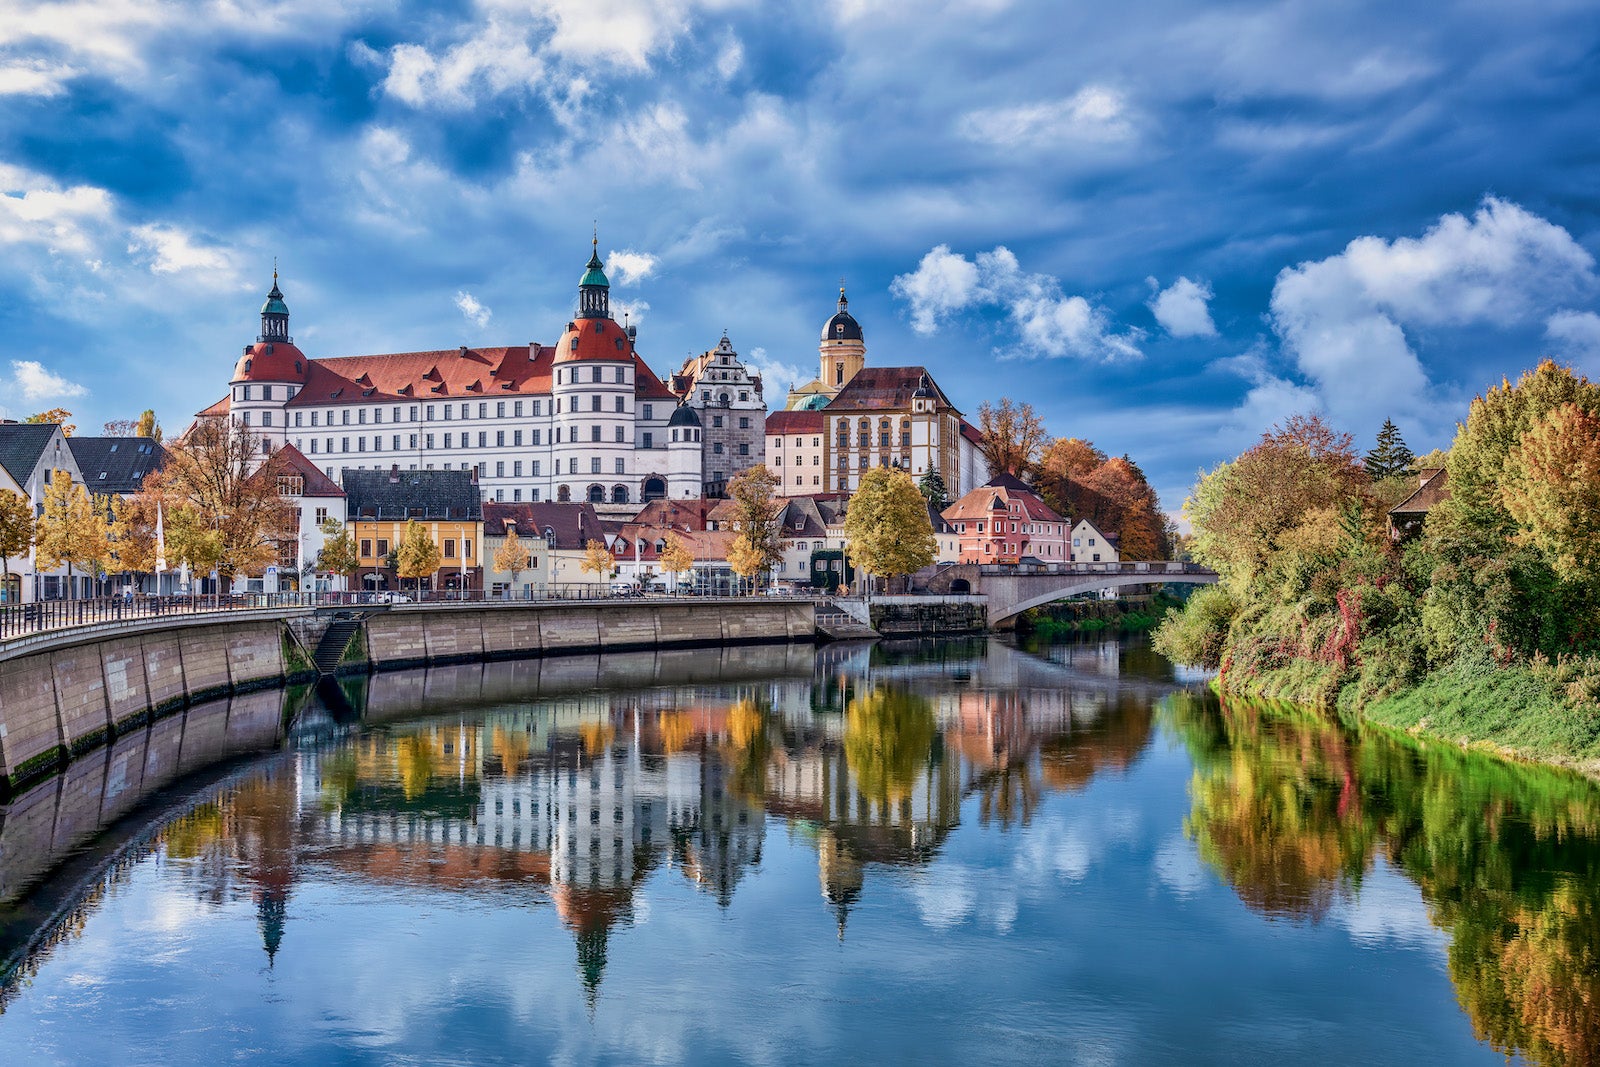 Old town with trees in autumn colors, Neuburg an der Donau, Bavaria, Germany